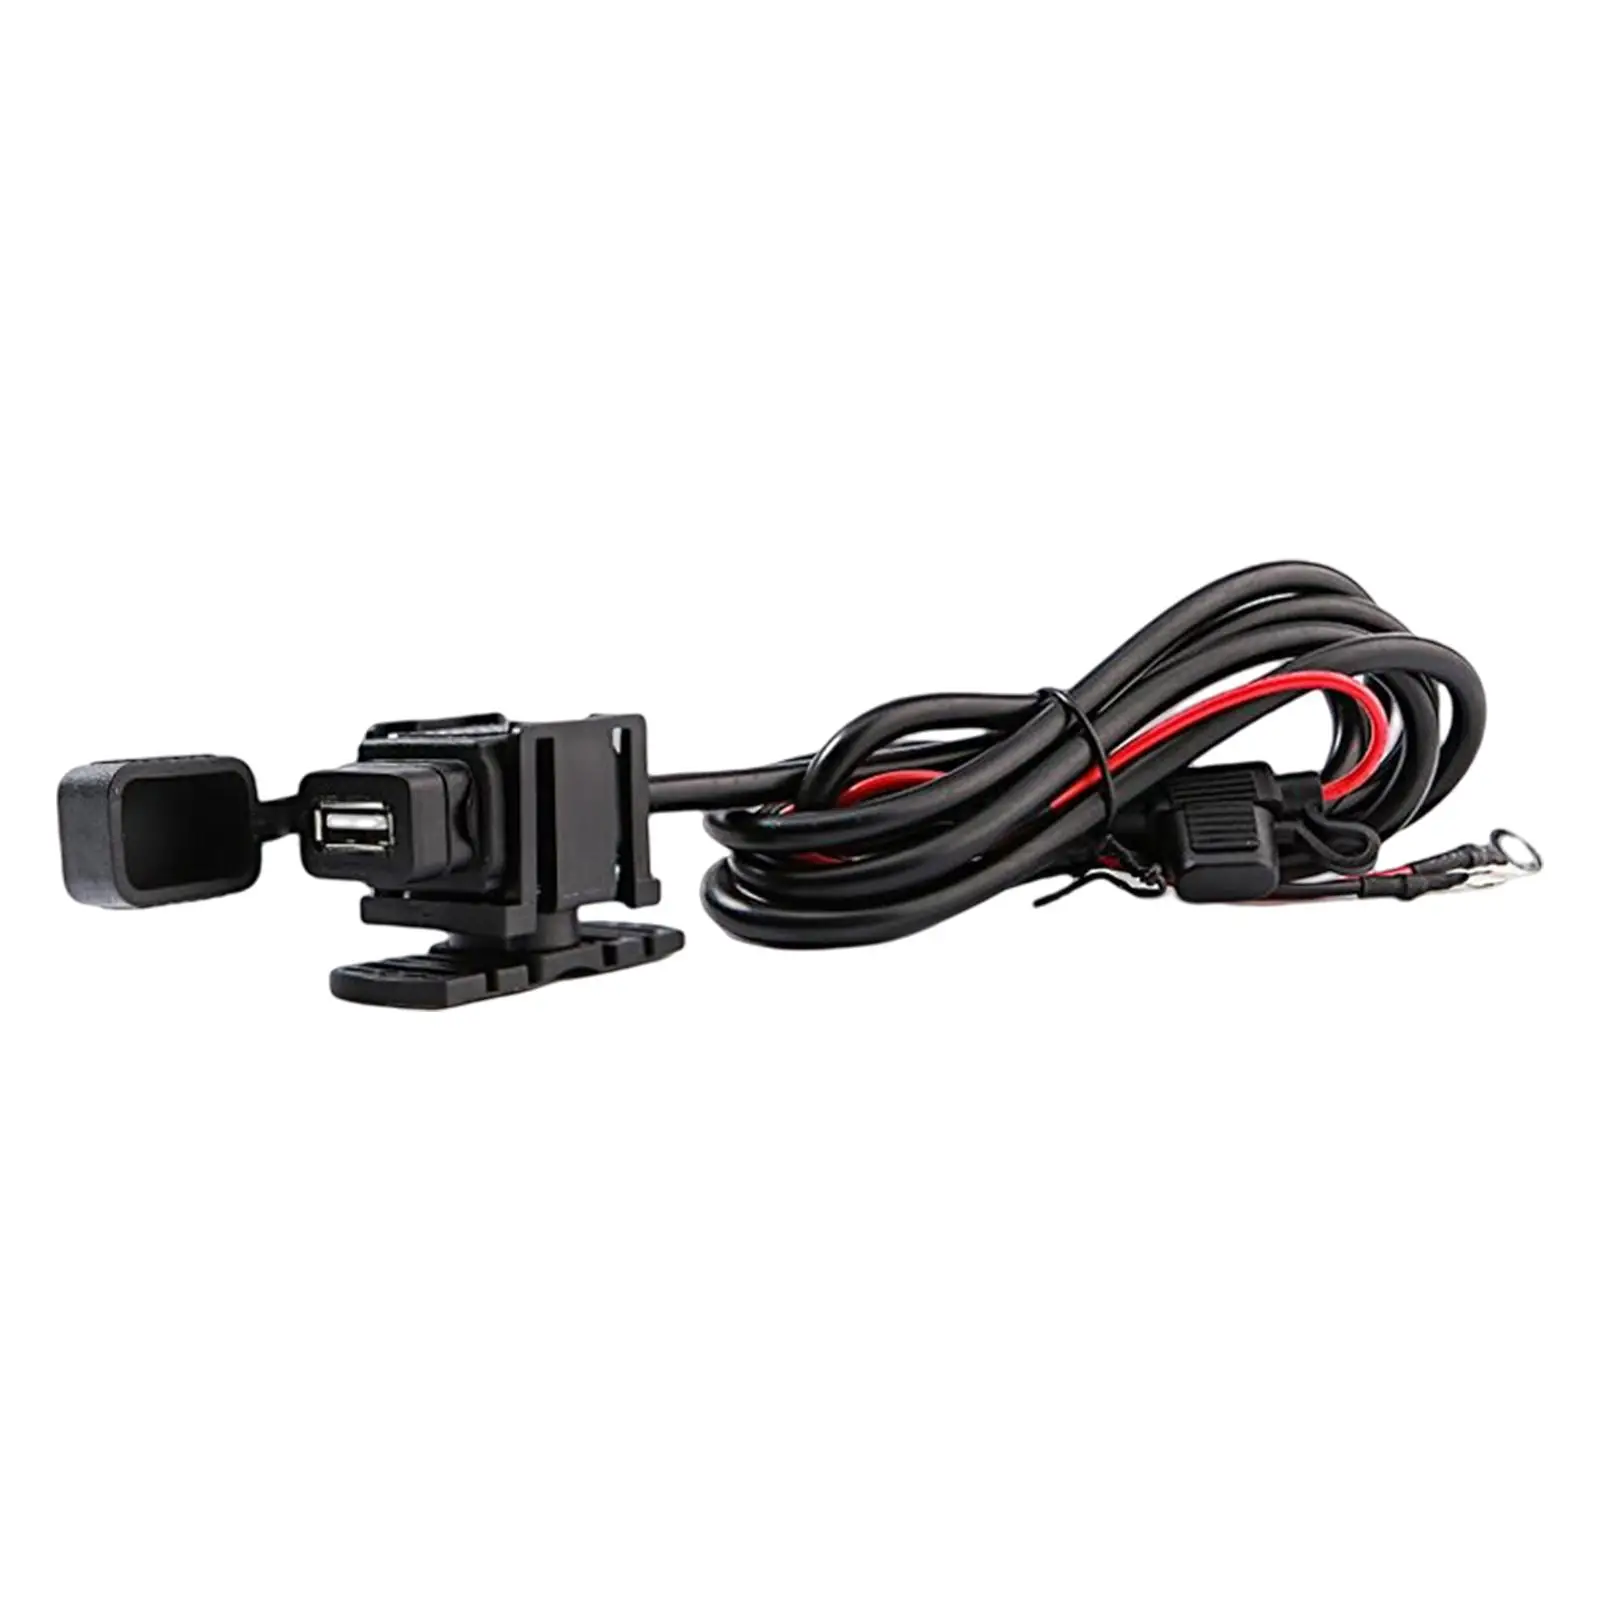 Motorcycle USB Phone Charger Adapter Cable, Waterproof USB Port, 12V-24V, for